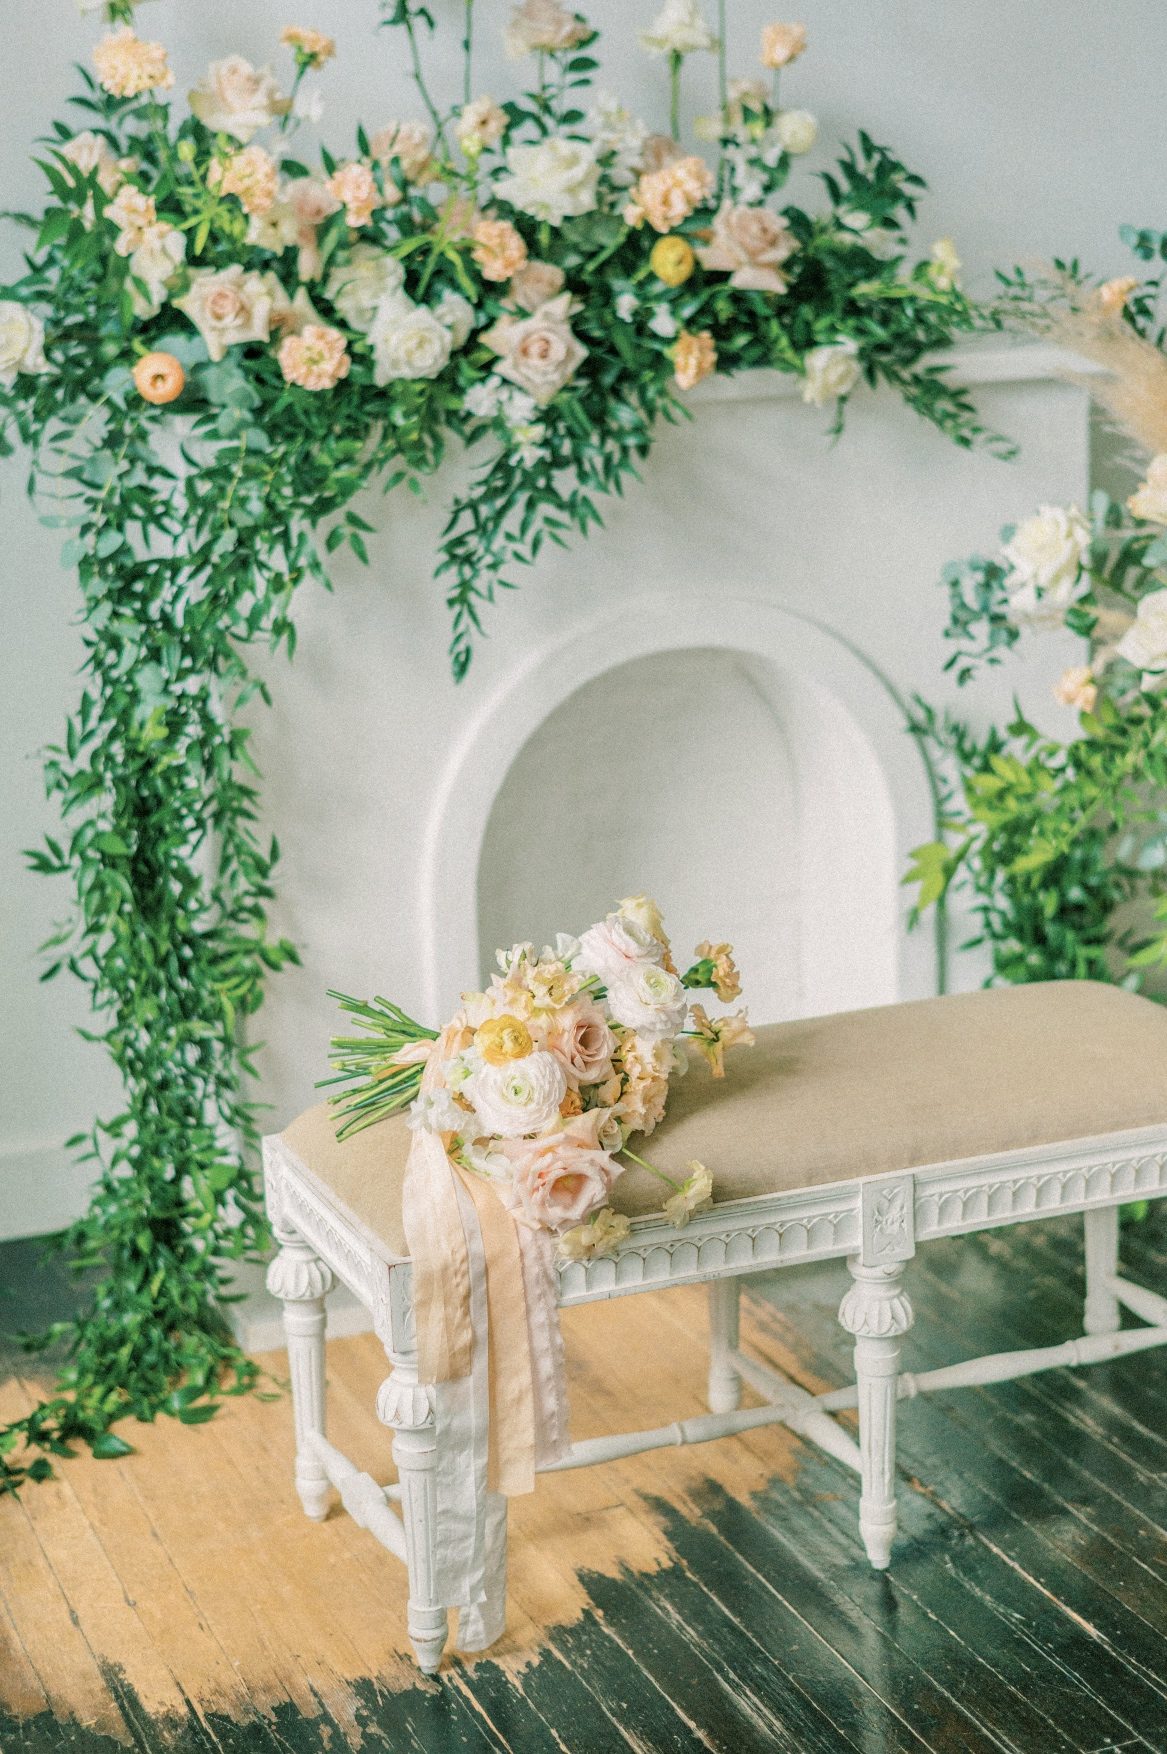 A faux fireplace with a large floral arrangement in peaches and blush over the mantel with lots of greenery draping over the side. In front a white bench, with the bridal bouquet in matching flowers is set on its side